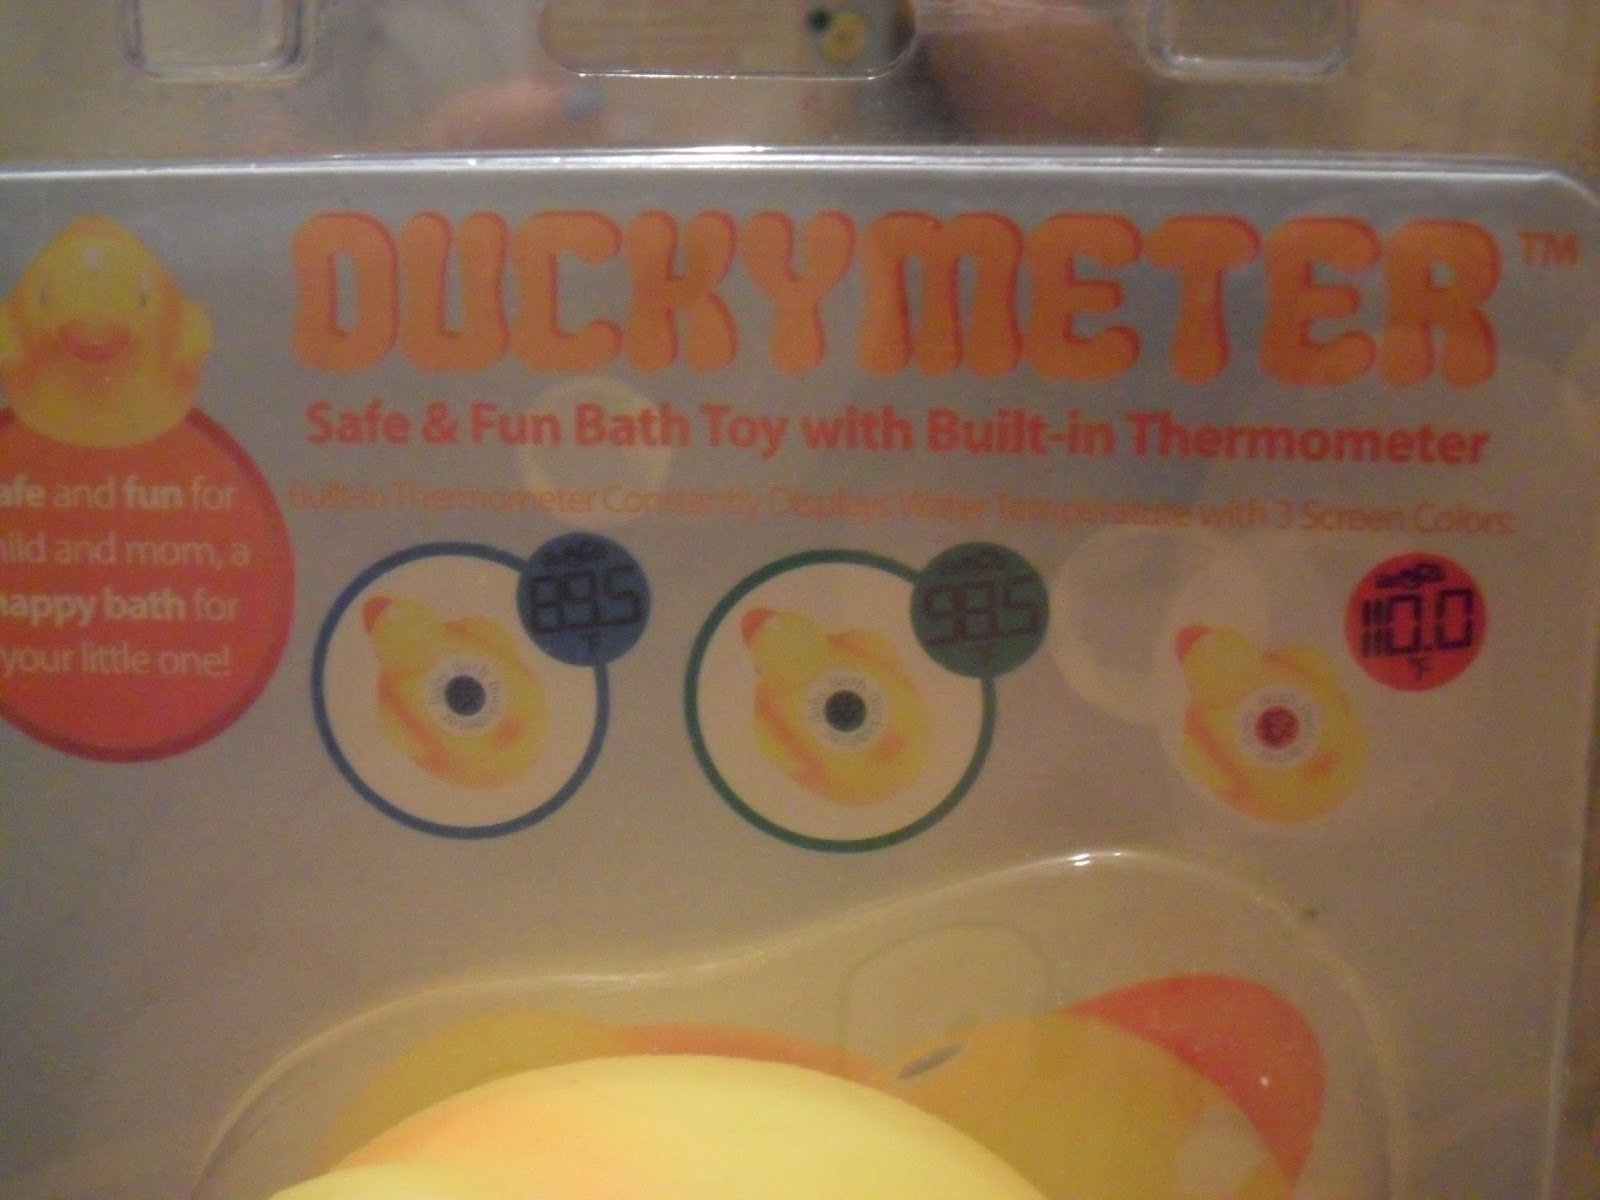 Not too Cold, not too warm my baby perfect bath. The Duckimeter Ozeri. Review